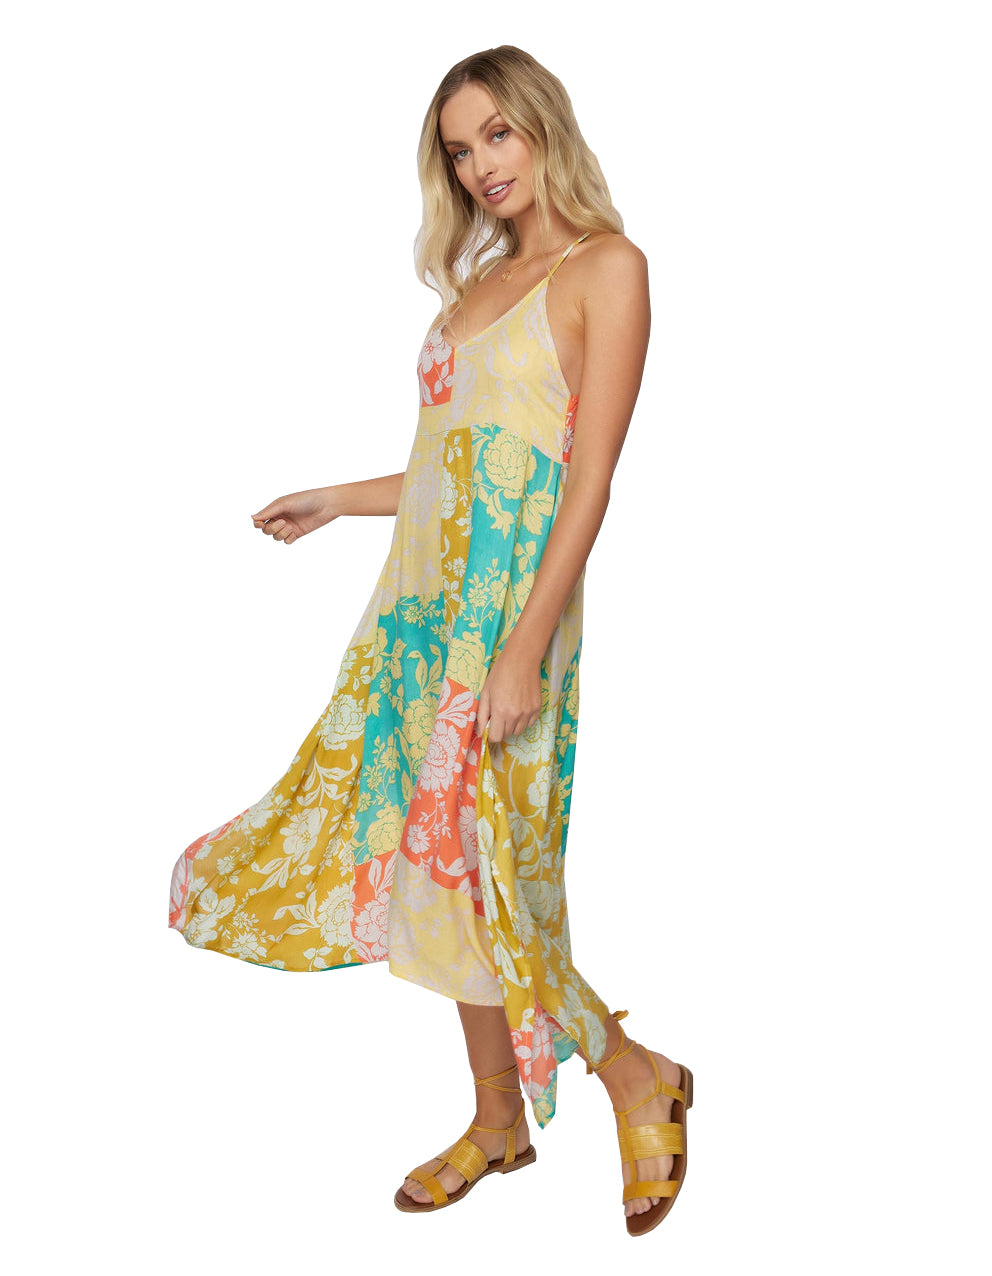 O'Neill Aries Midi Cover Up MUL XS